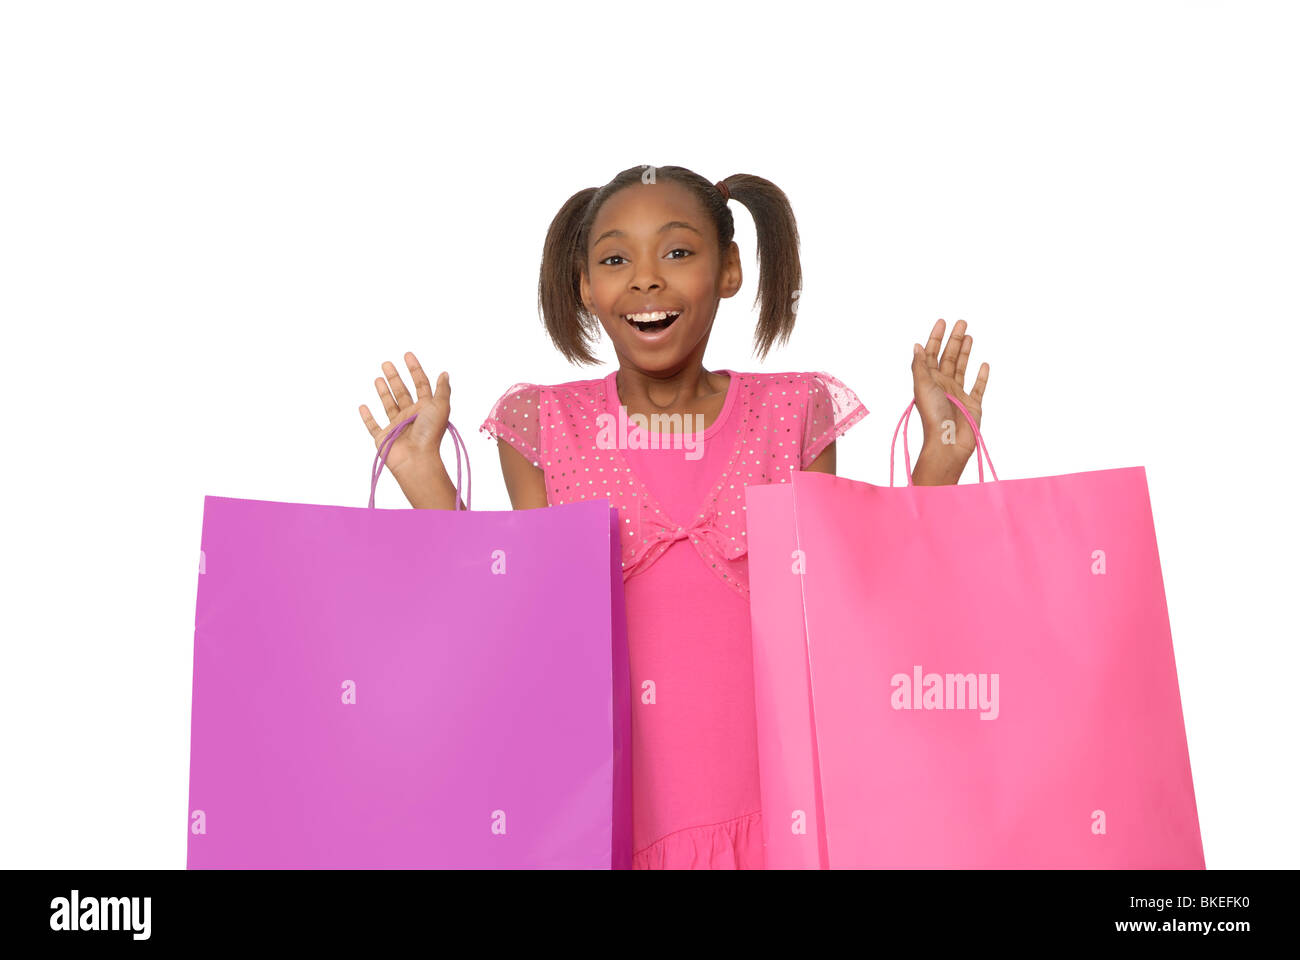 Ten year old girl with shopping bags. Stock Photo